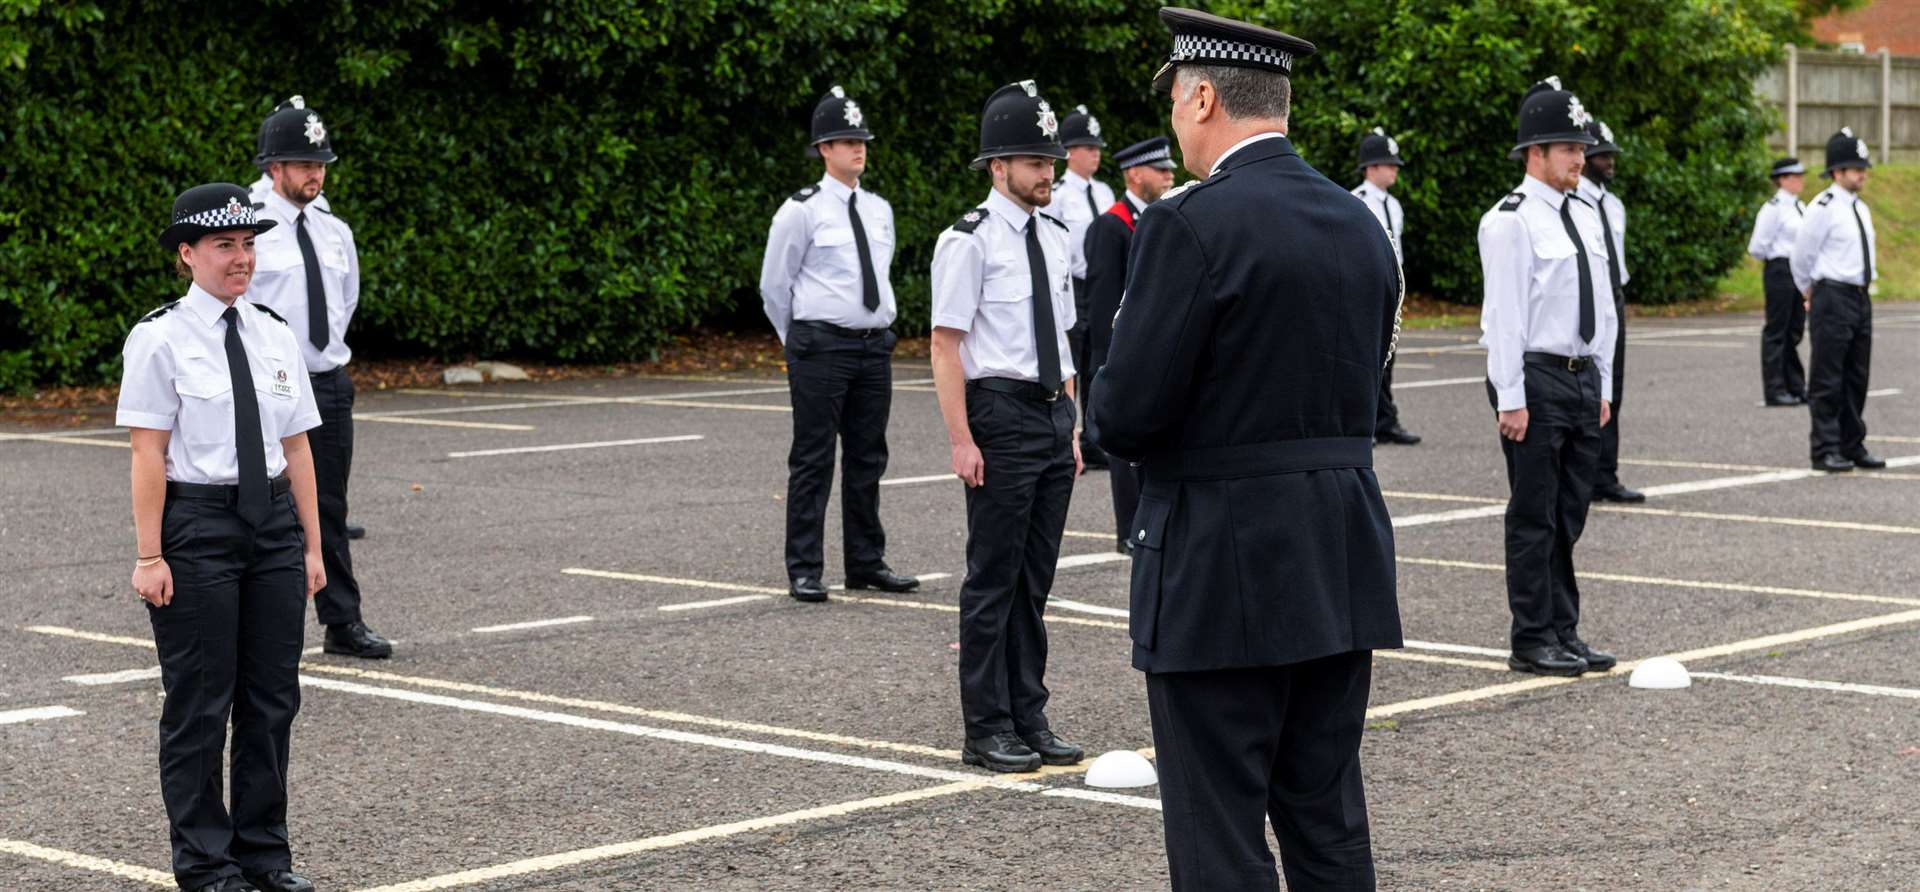 Chief Constable Alan Pughsley welcomed the new recruits